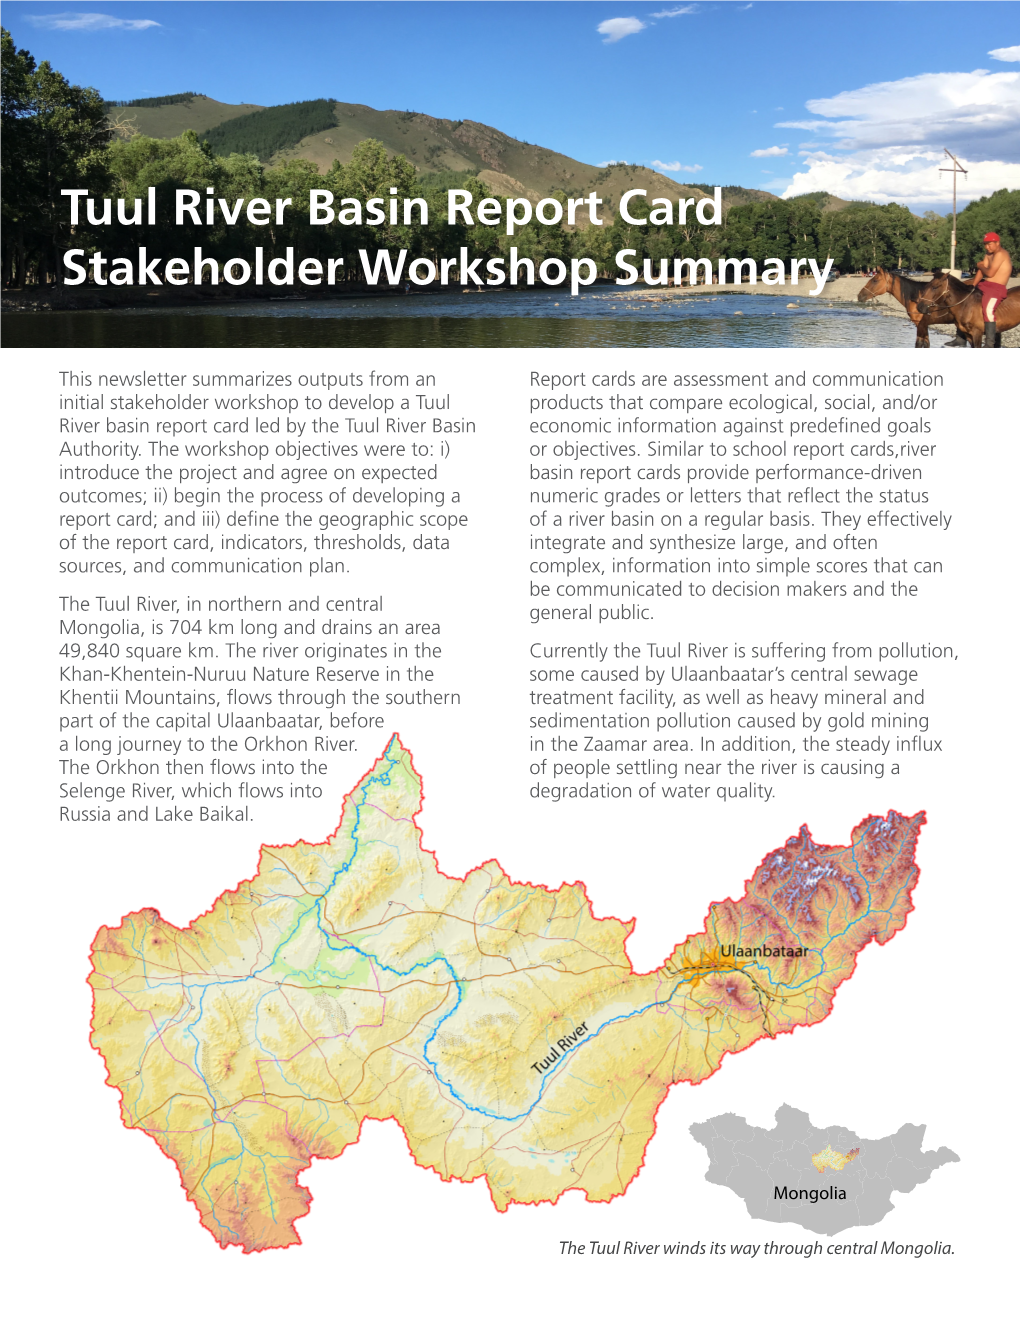 Tuul River Basin Report Card Stakeholder Workshop Summary